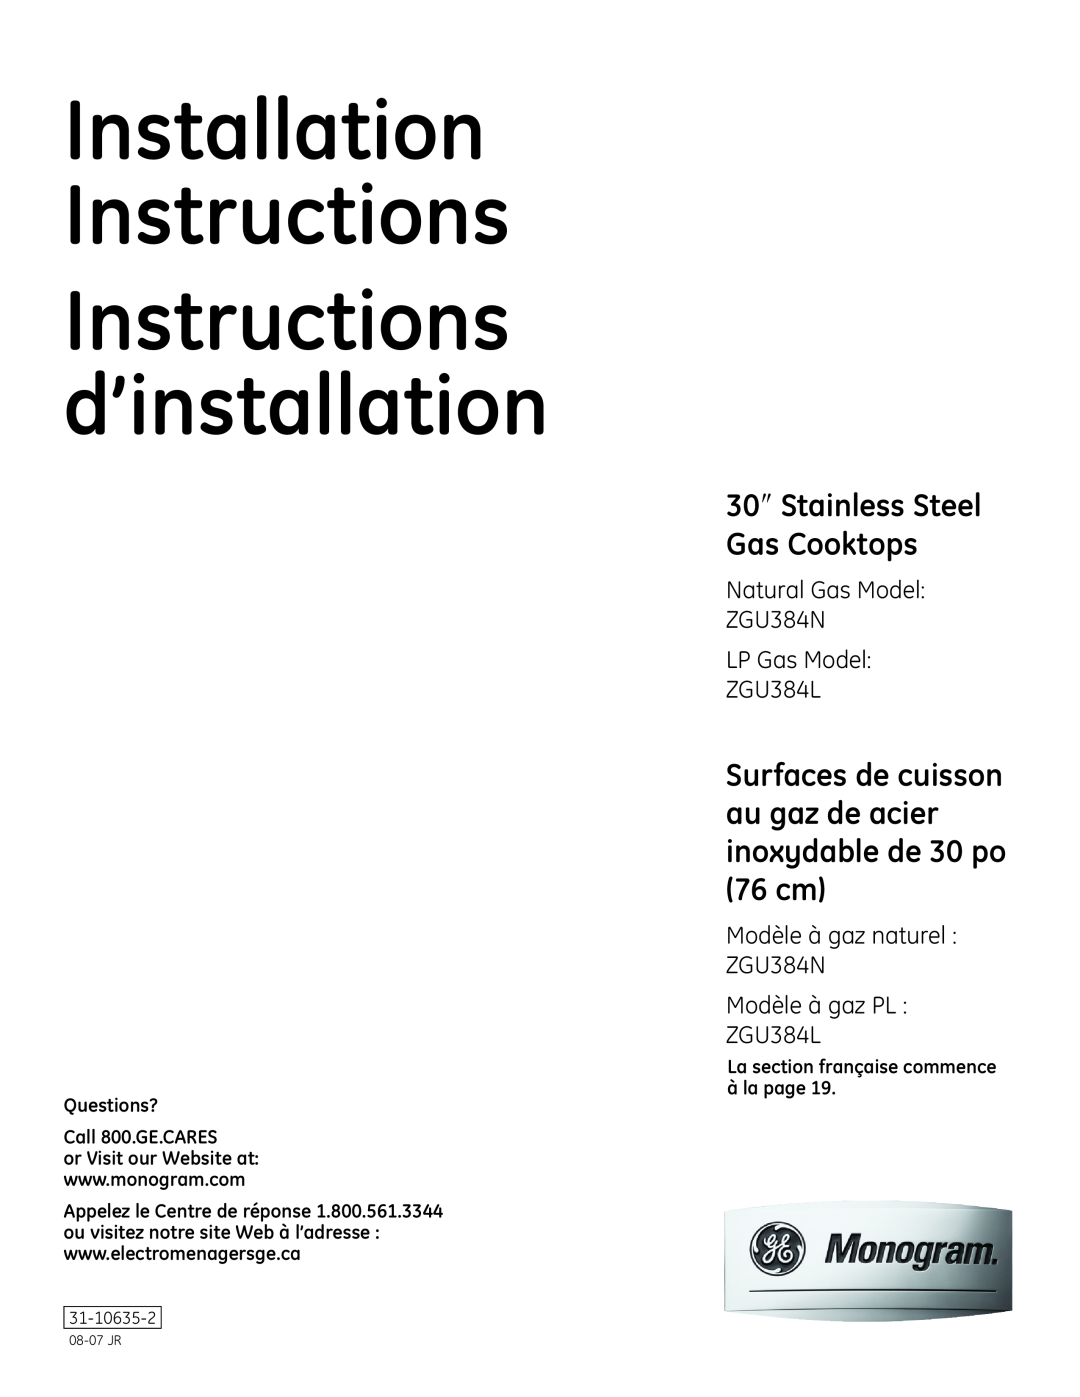 GE Monogram ZGU384N installation instructions 30″ Stainless Steel Gas Cooktops, Questions? Call 800.GE.CARES 